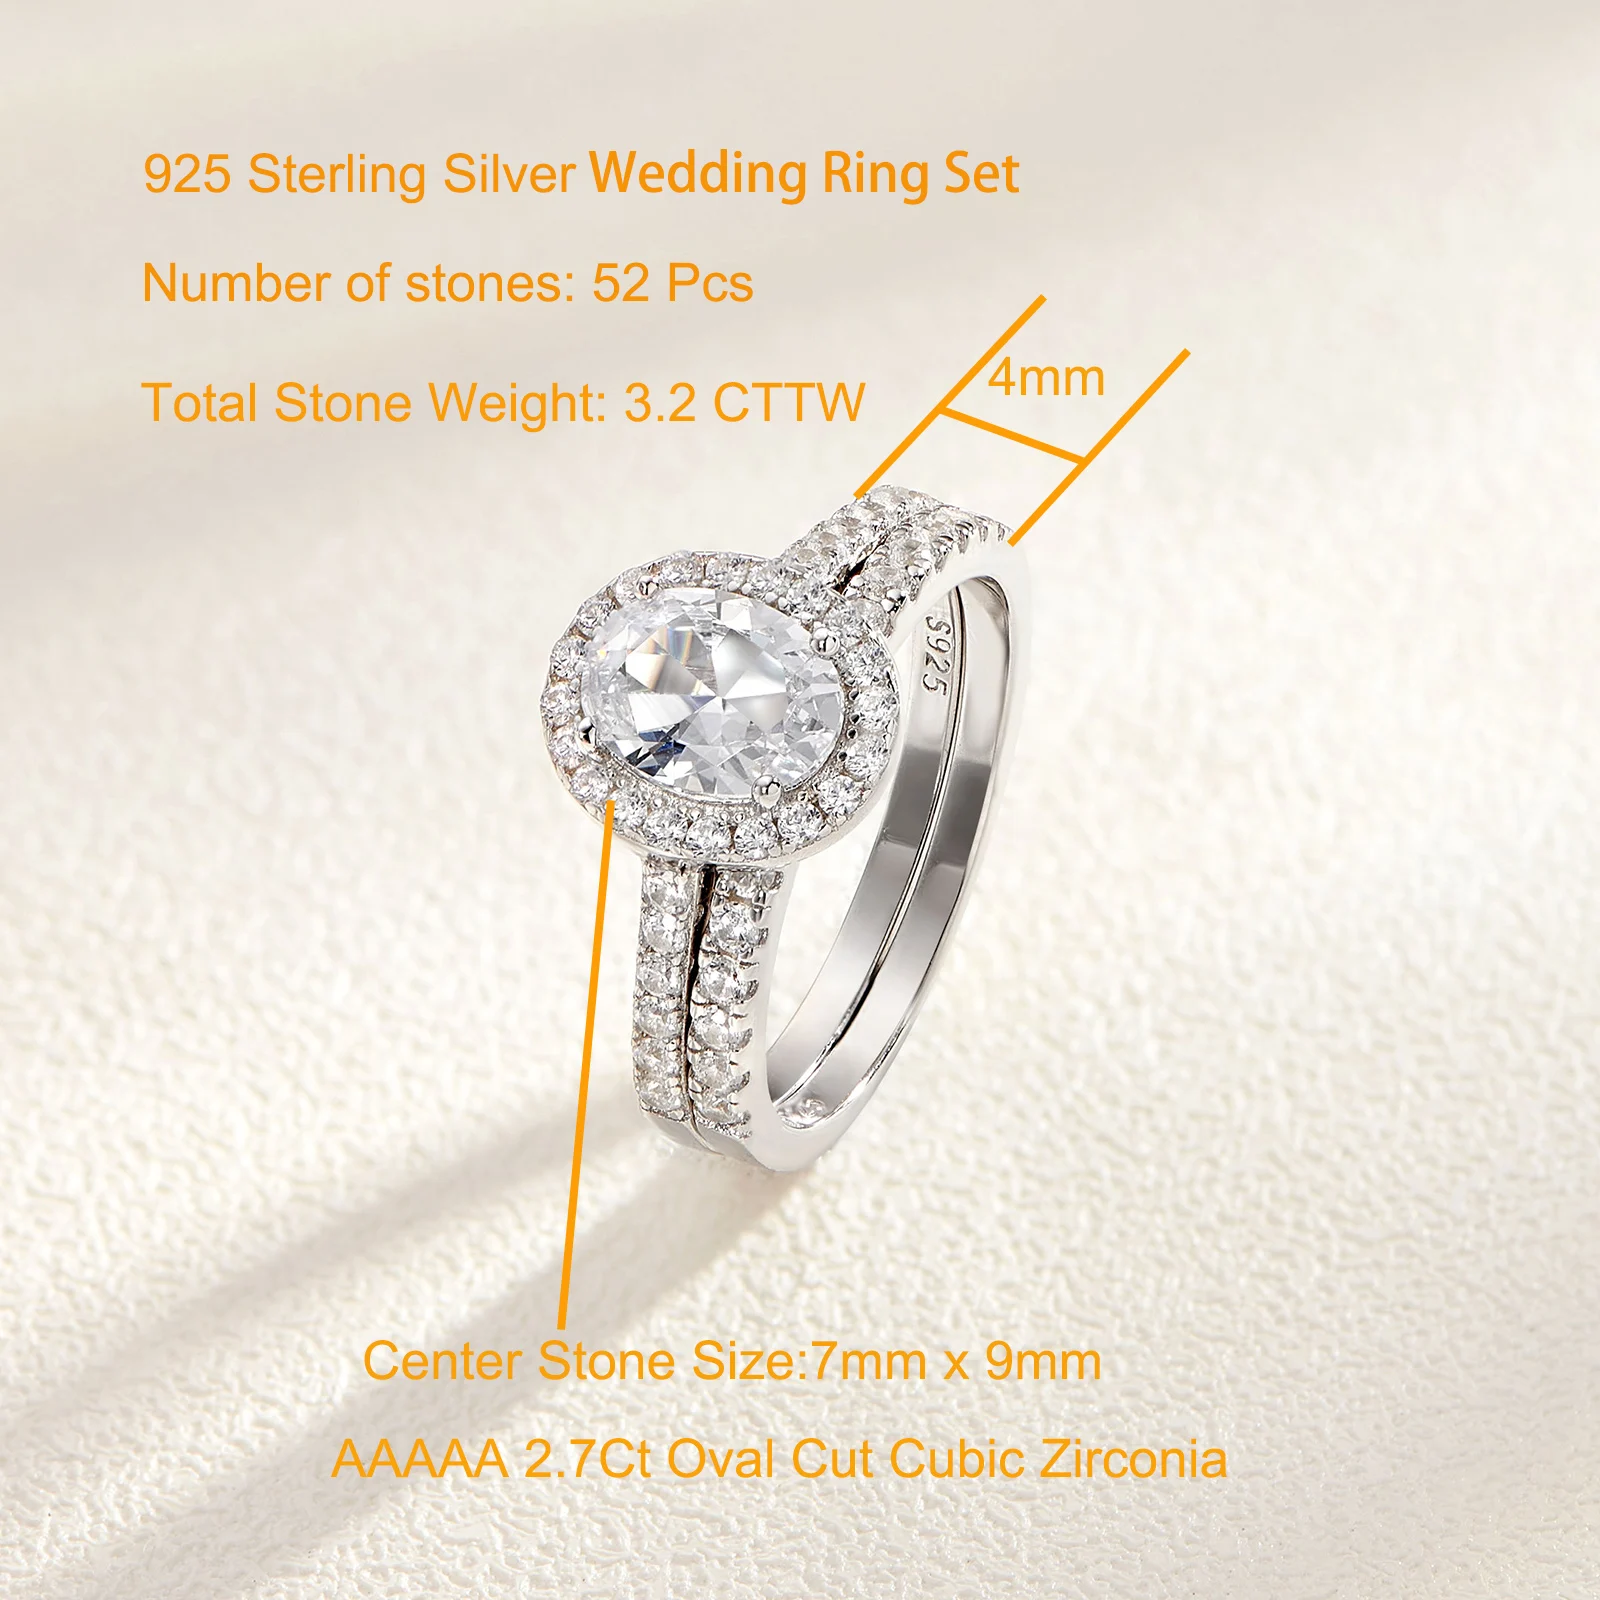 925 Sterling Silver Cz Halo Wedding Band Engagement Rings Set Size